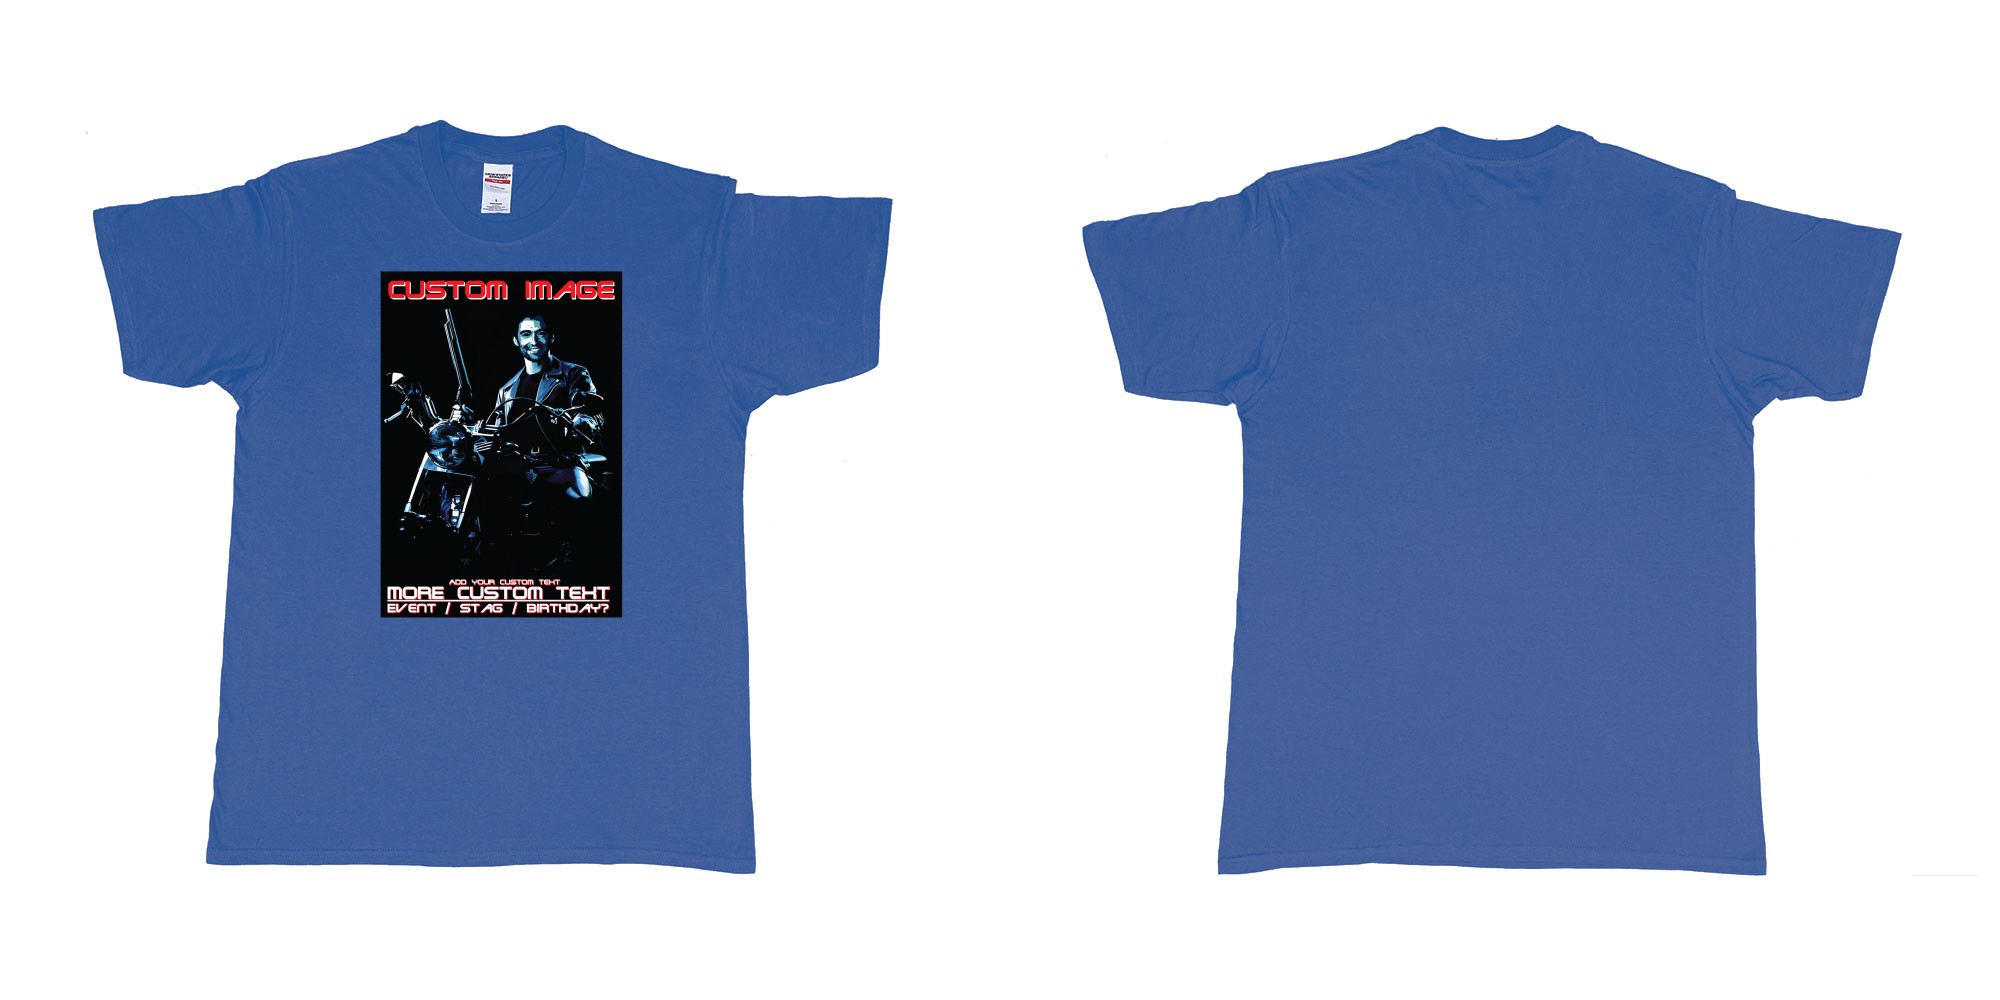 Custom tshirt design terminator 2 judgement day hugh jackman custom face in fabric color royal-blue choice your own text made in Bali by The Pirate Way